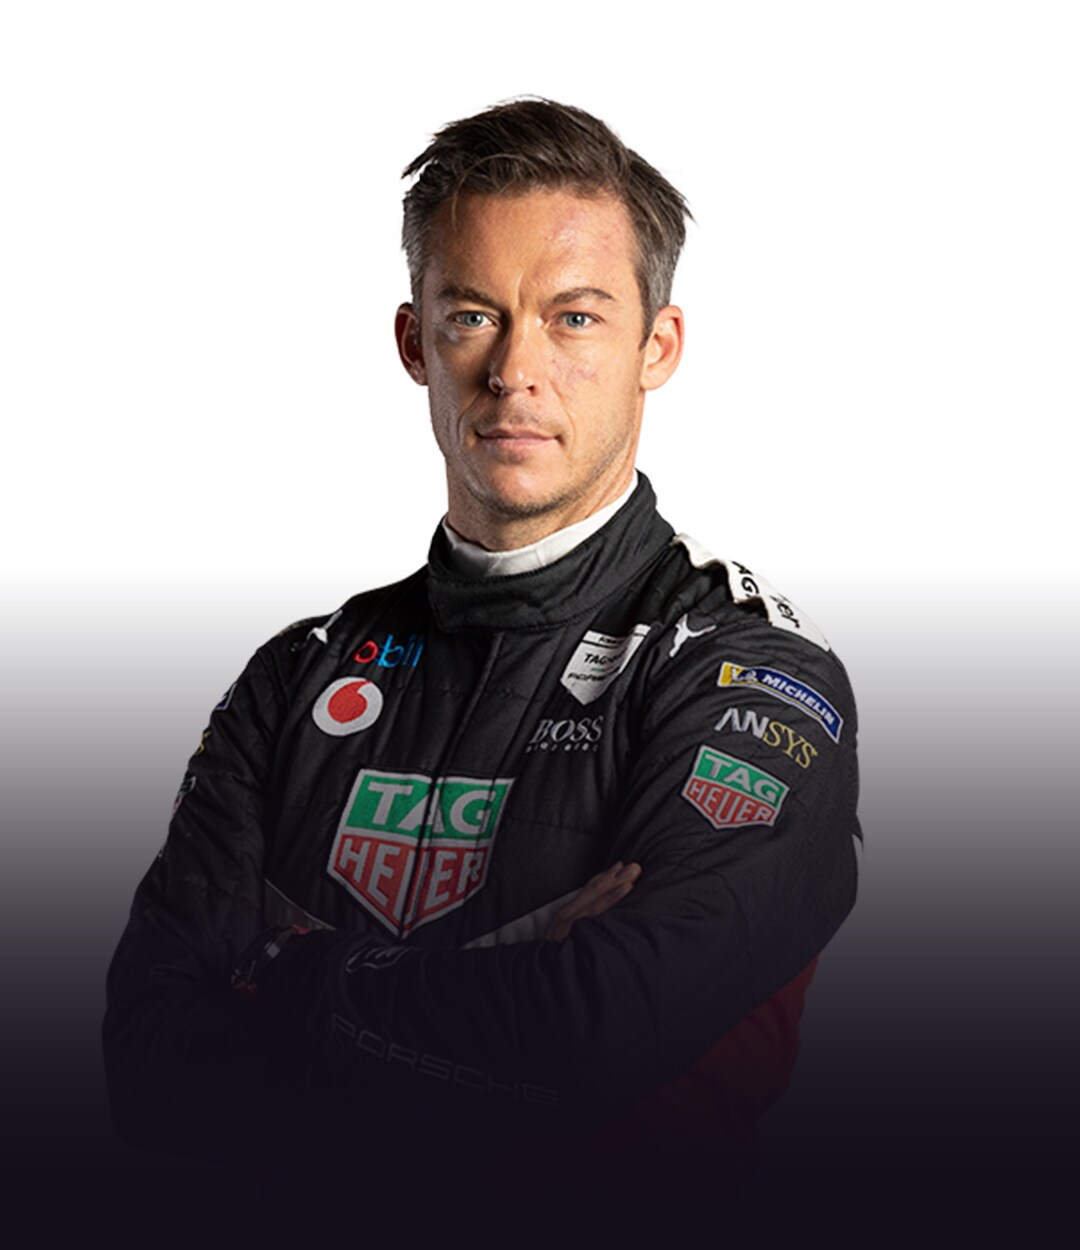 RED-BULL-RACING-ANDRÉ-LOTTERER